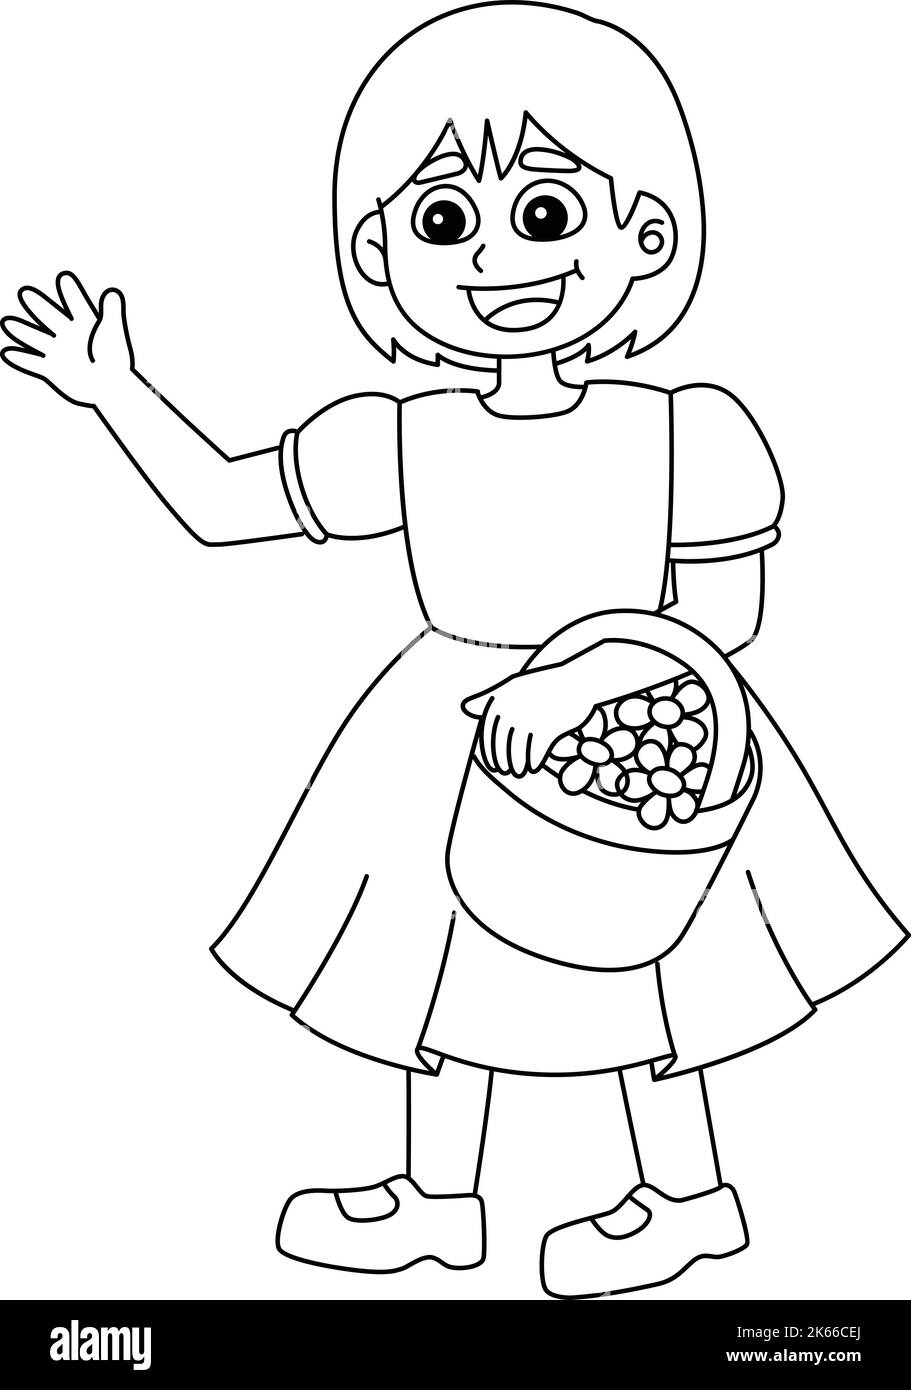 Wedding Flower Girl Isolated Coloring Page  Stock Vector